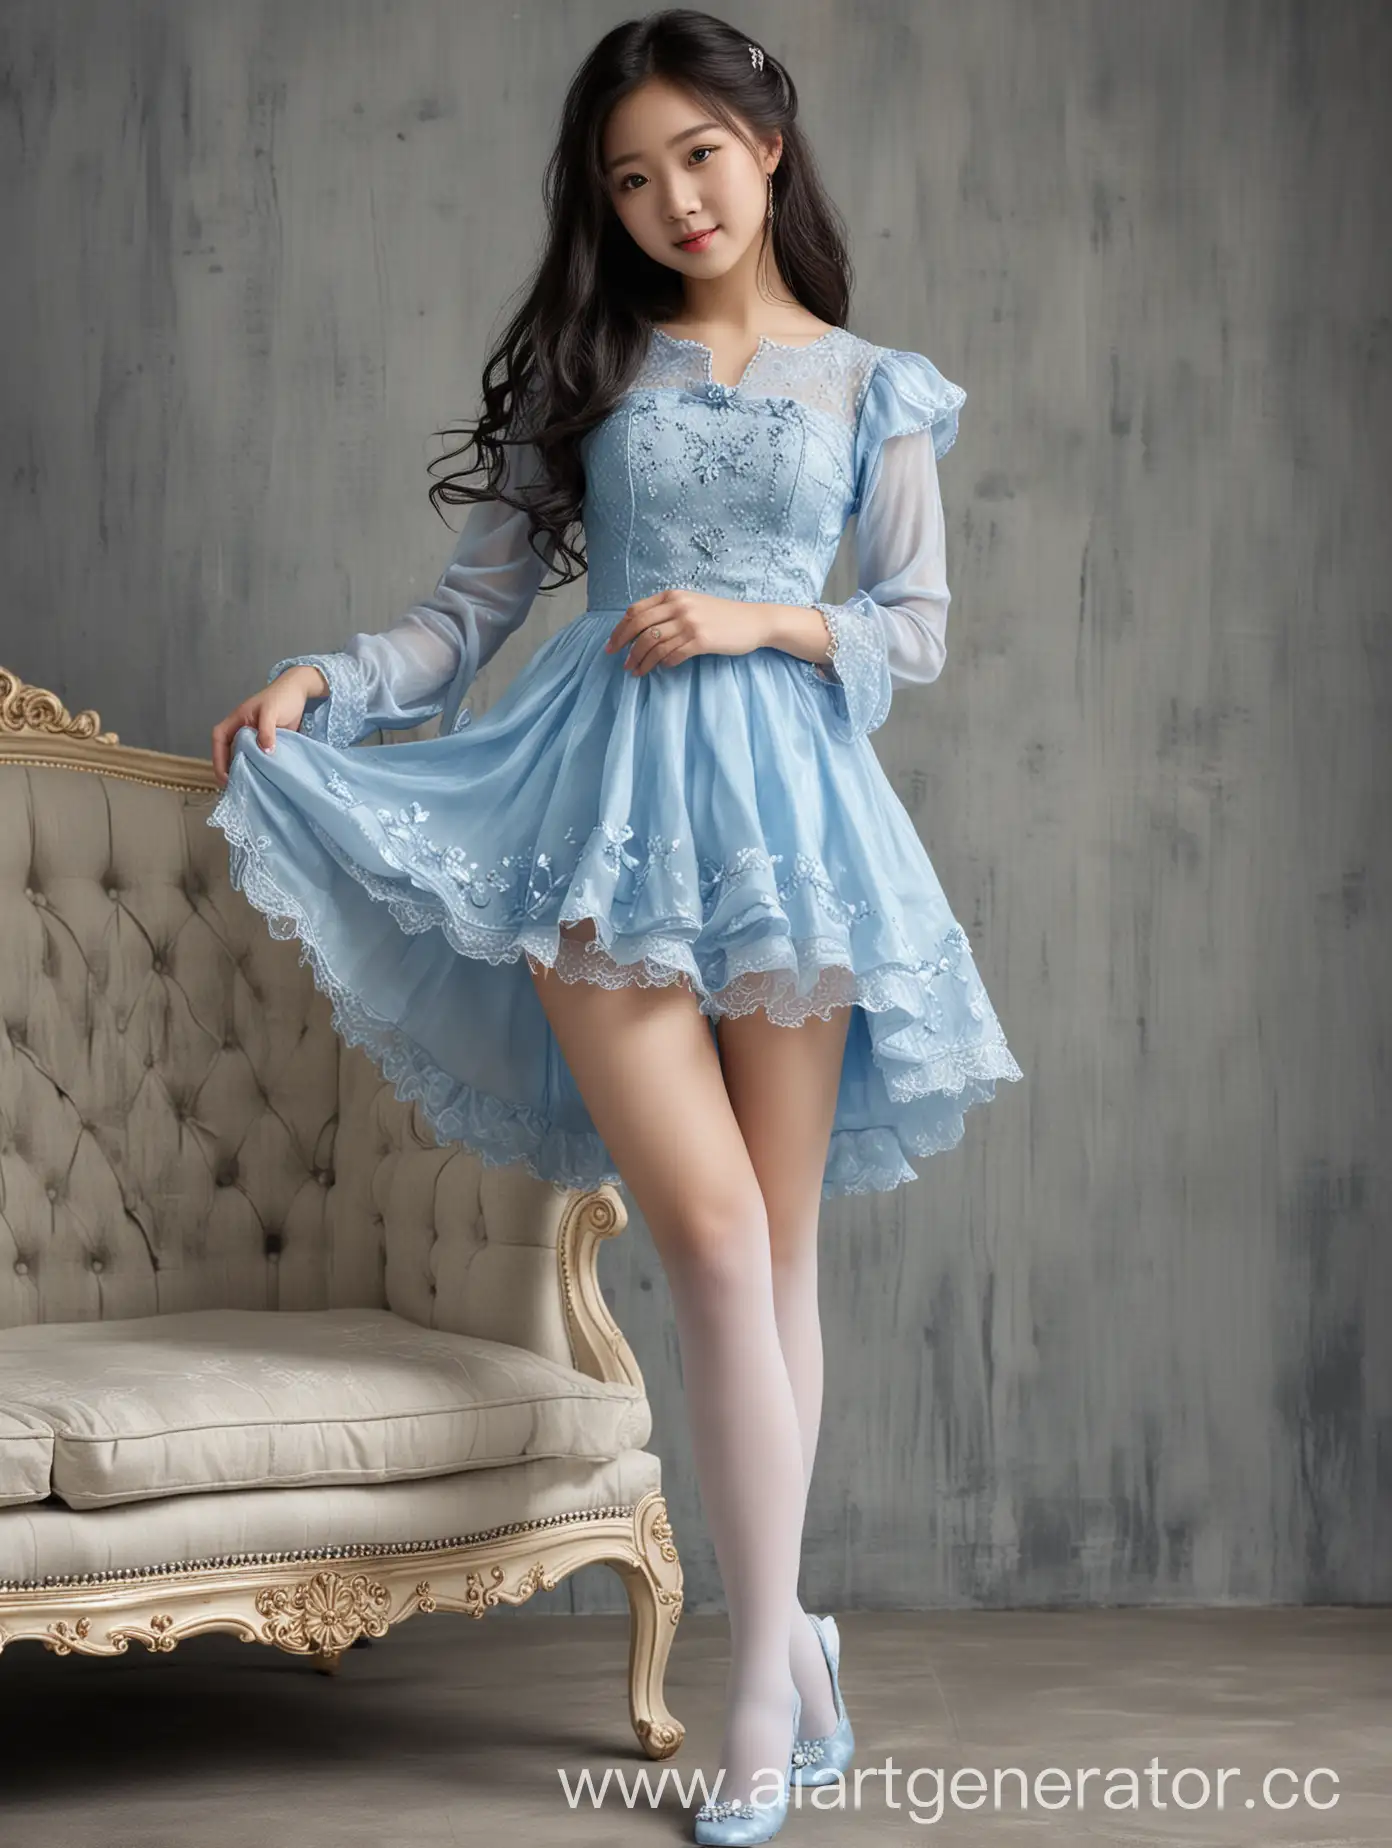 Graceful-Young-Asian-Girl-in-Blue-Princess-Dress-with-Sparkling-Shoes-and-Flowing-Hair